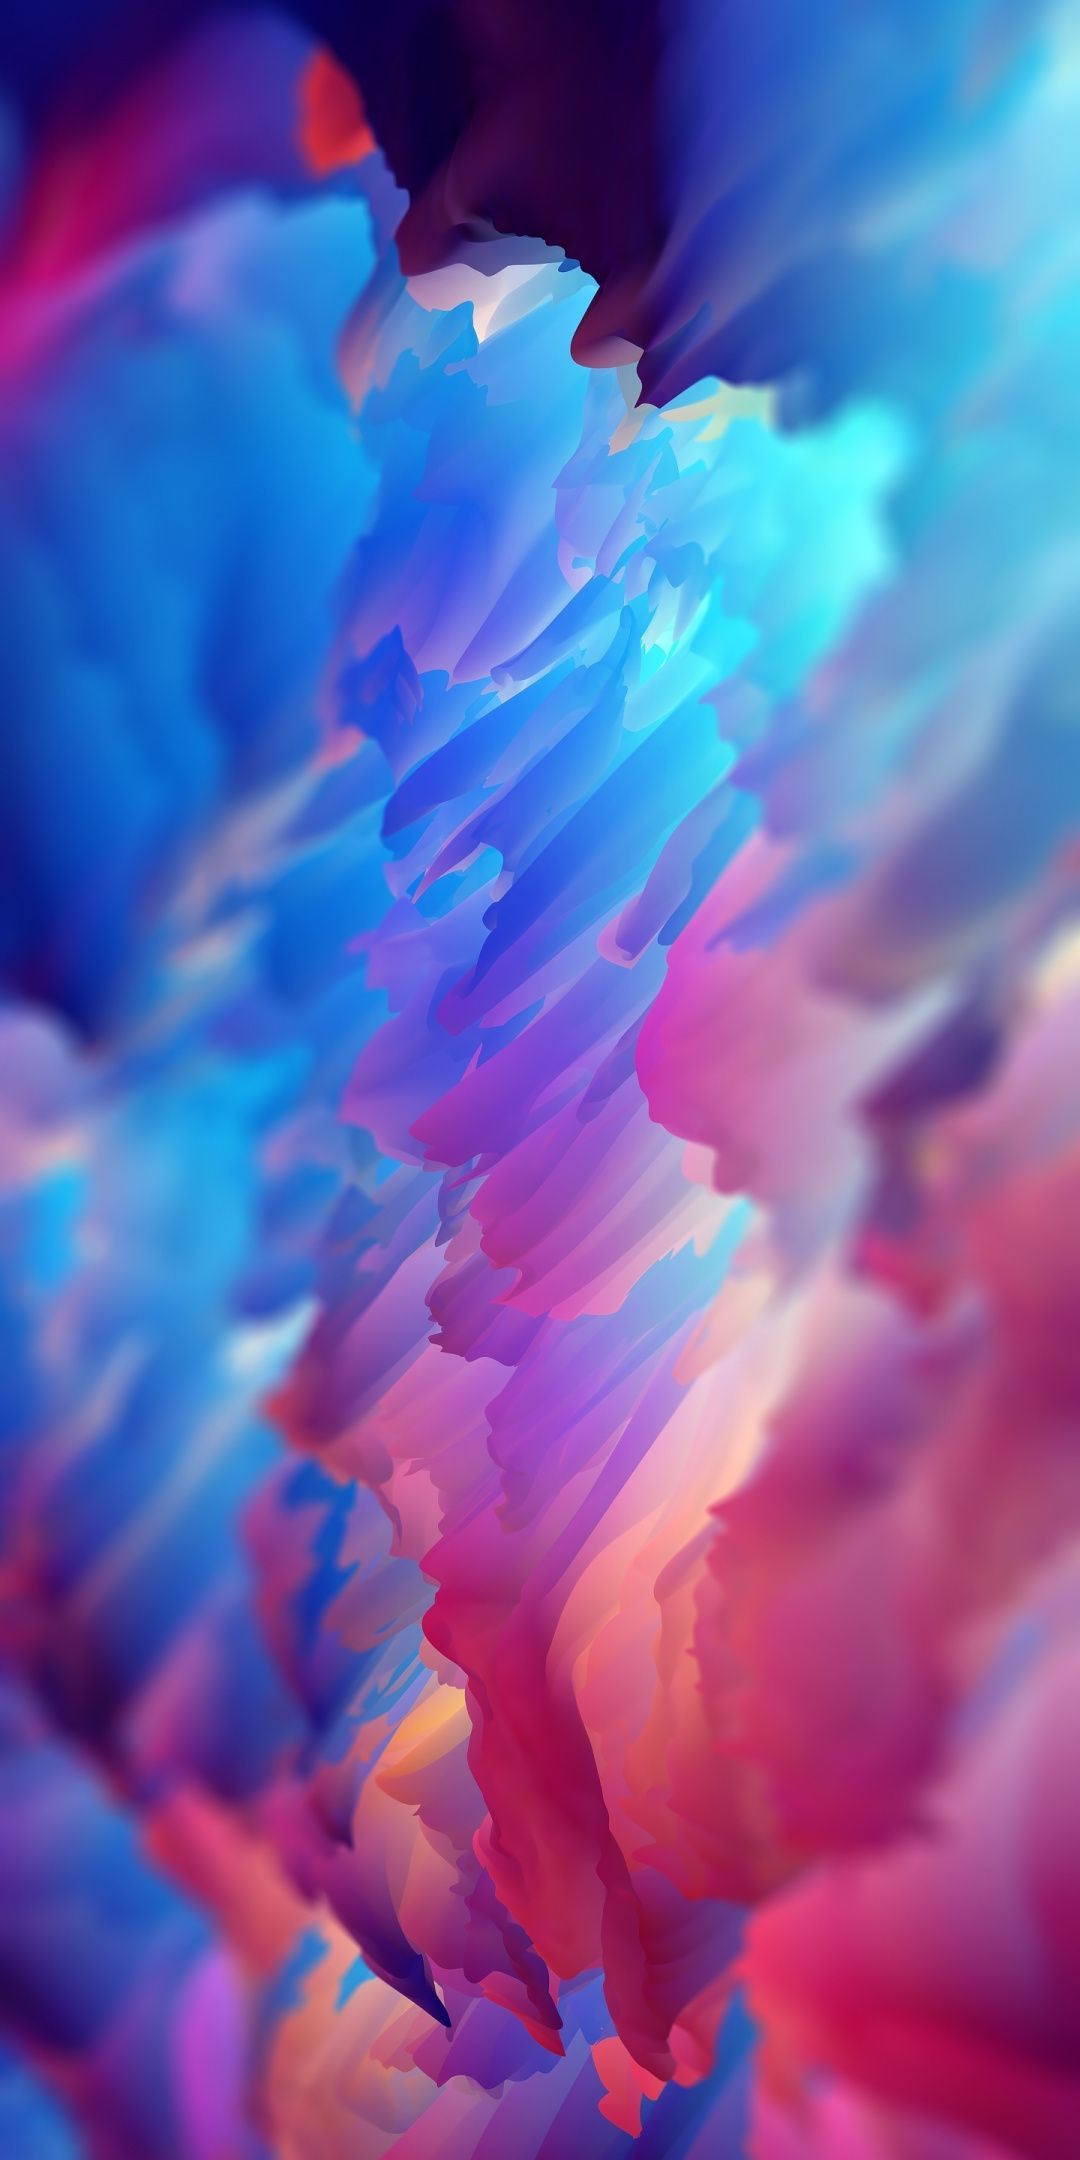 Download 1080x2160 wallpaper Surface, colorful, abstract, bright, Honor 7X, Honor 9 Lite, Honor View. Abstract iphone wallpaper, Bright wallpaper, Wallpaper space